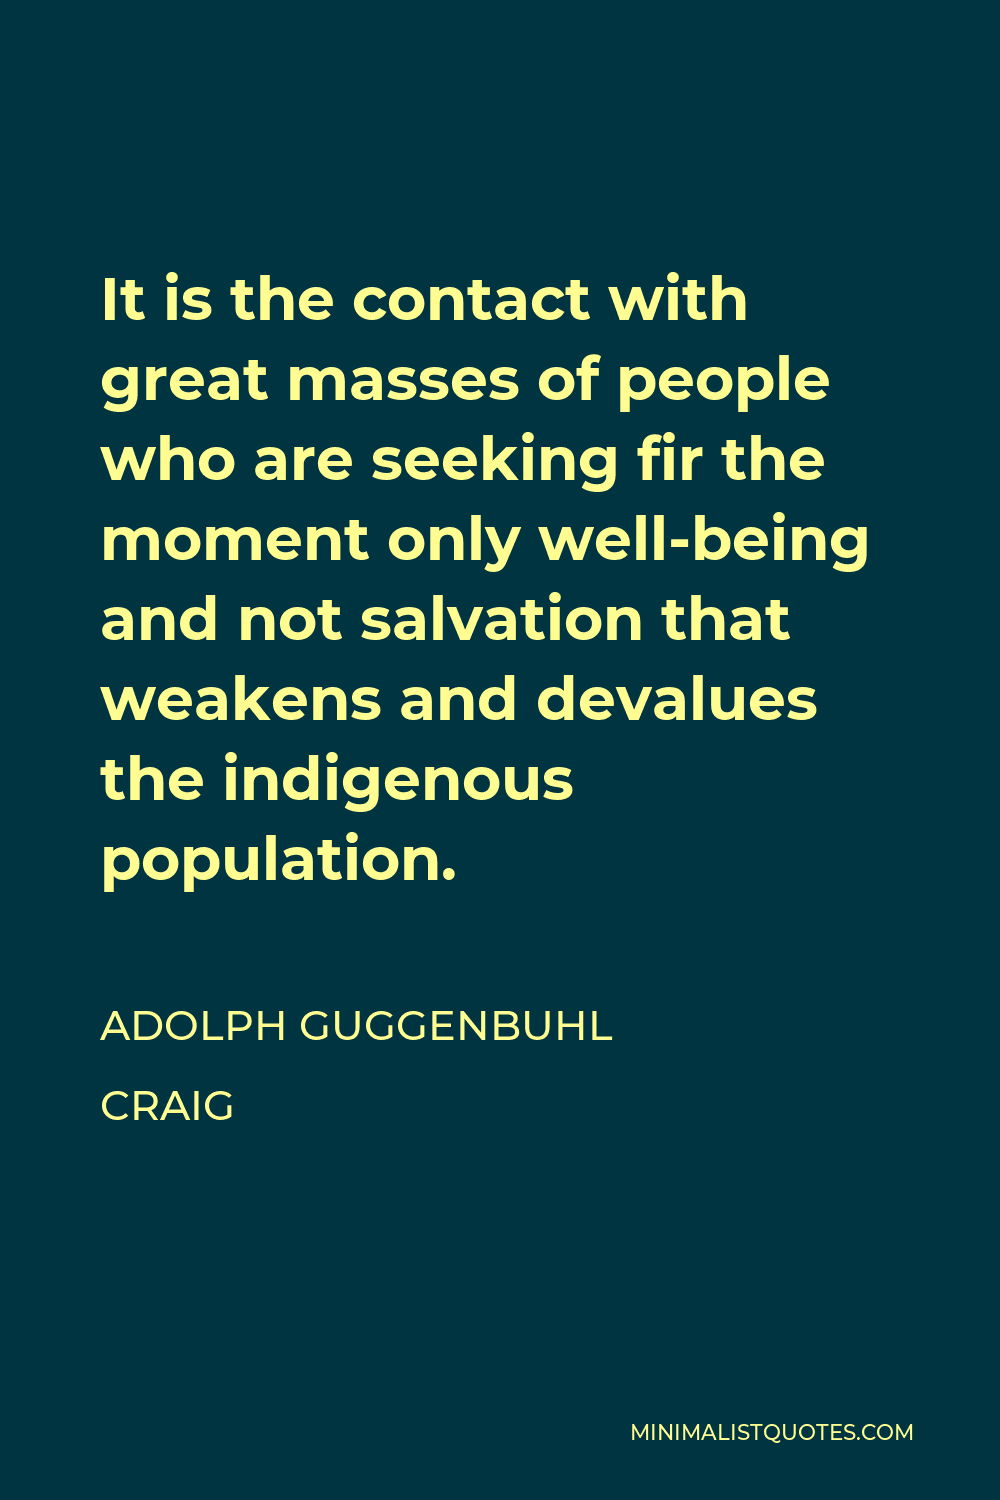 Adolph Guggenbuhl Craig Quote - It is the contact with great masses of people who are seeking fir the moment only well-being and not salvation that weakens and devalues the indigenous population.